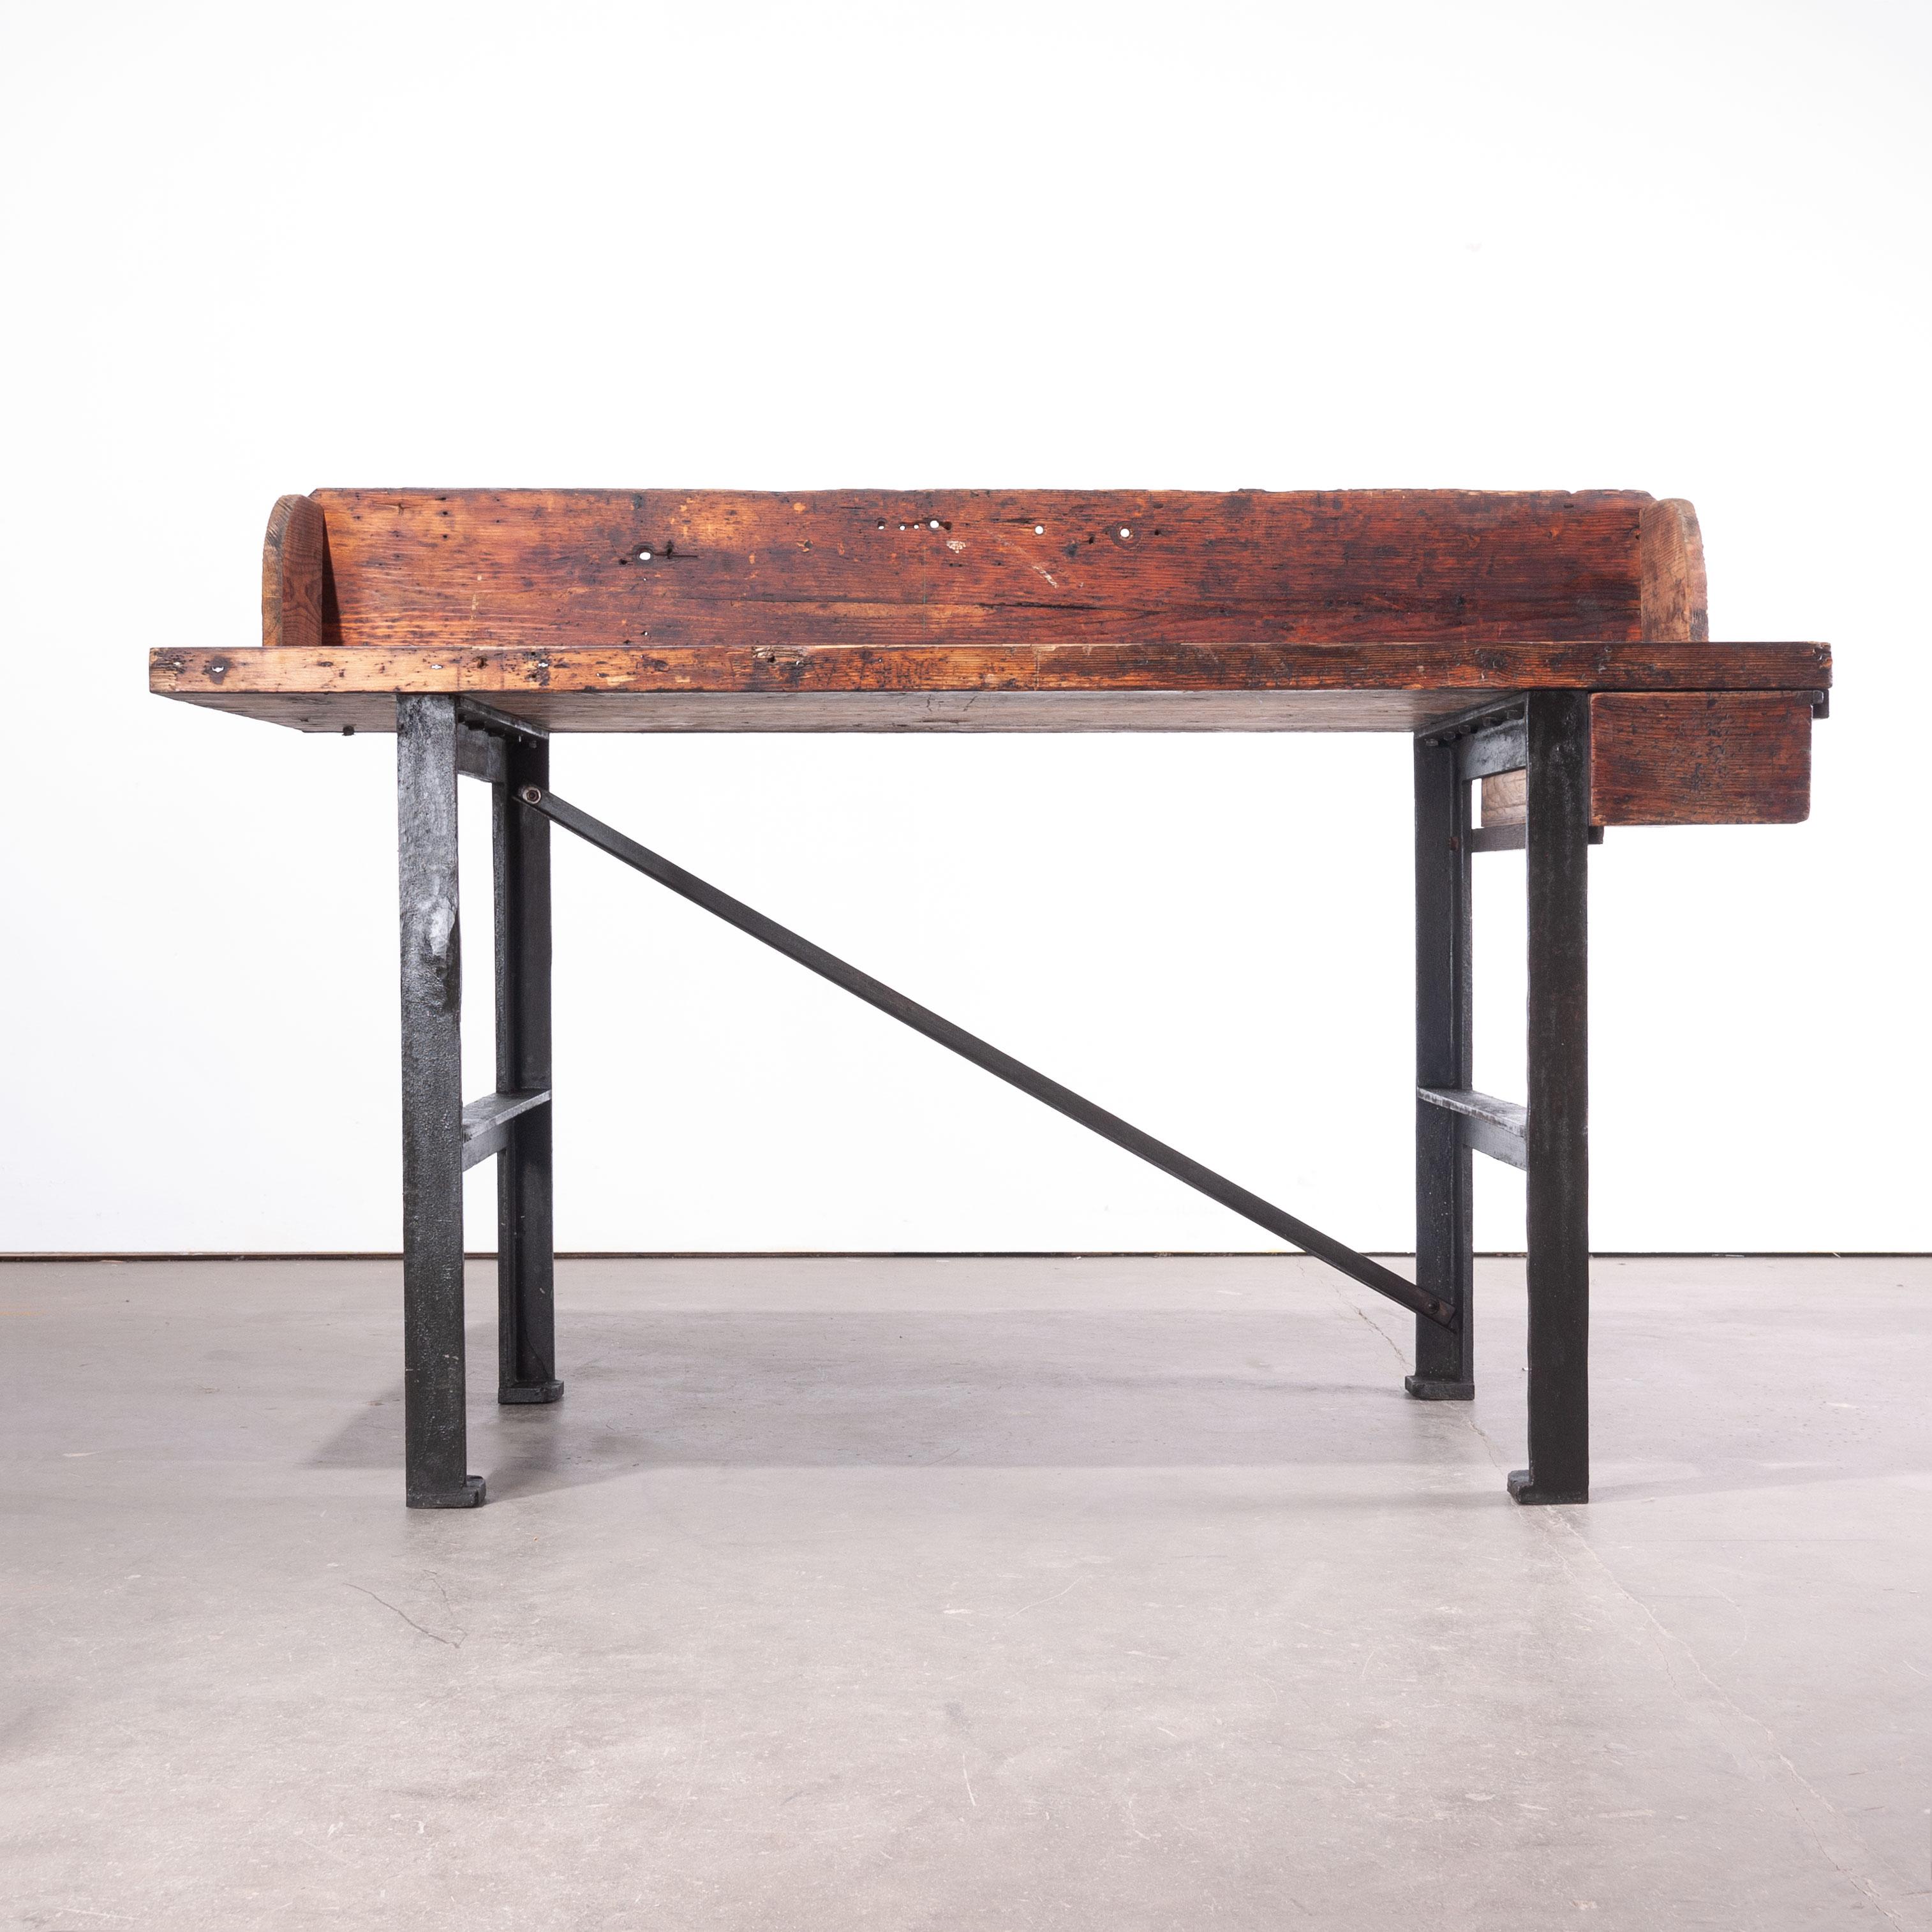 1890s Industrial Mill Work Bench/Console Table with Upstand 1